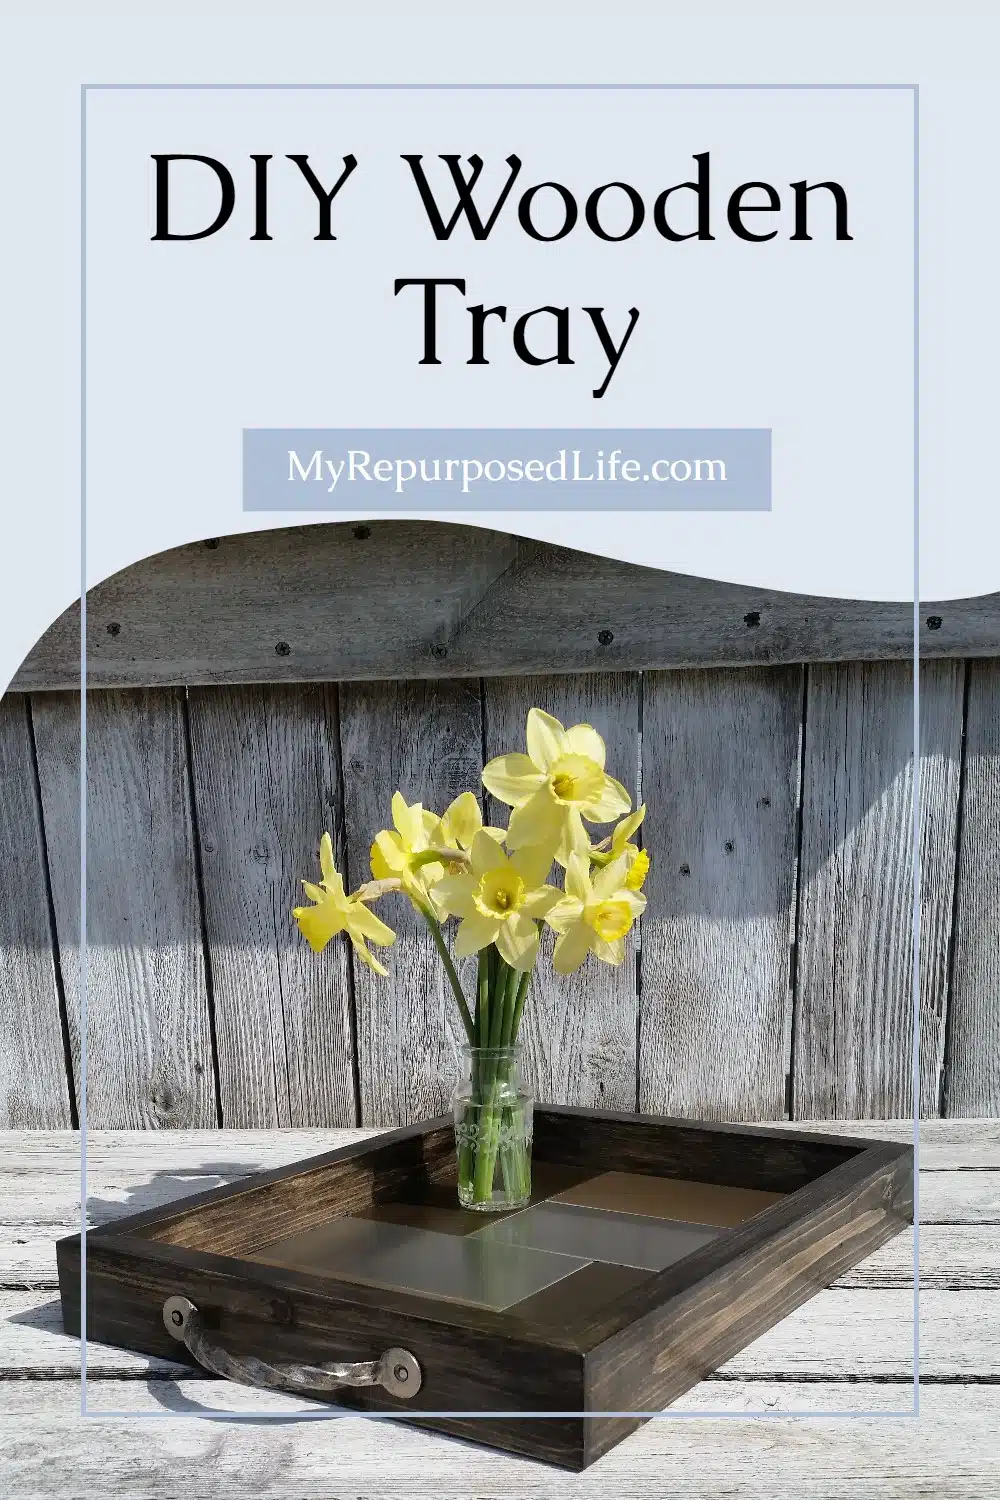 Easy tray project, using metal stick-on tiles. Step by step directions to make a wooden tray, or you could put these easy tiles on a tray you already have. #MyRepurposedLife #tray via @repurposedlife